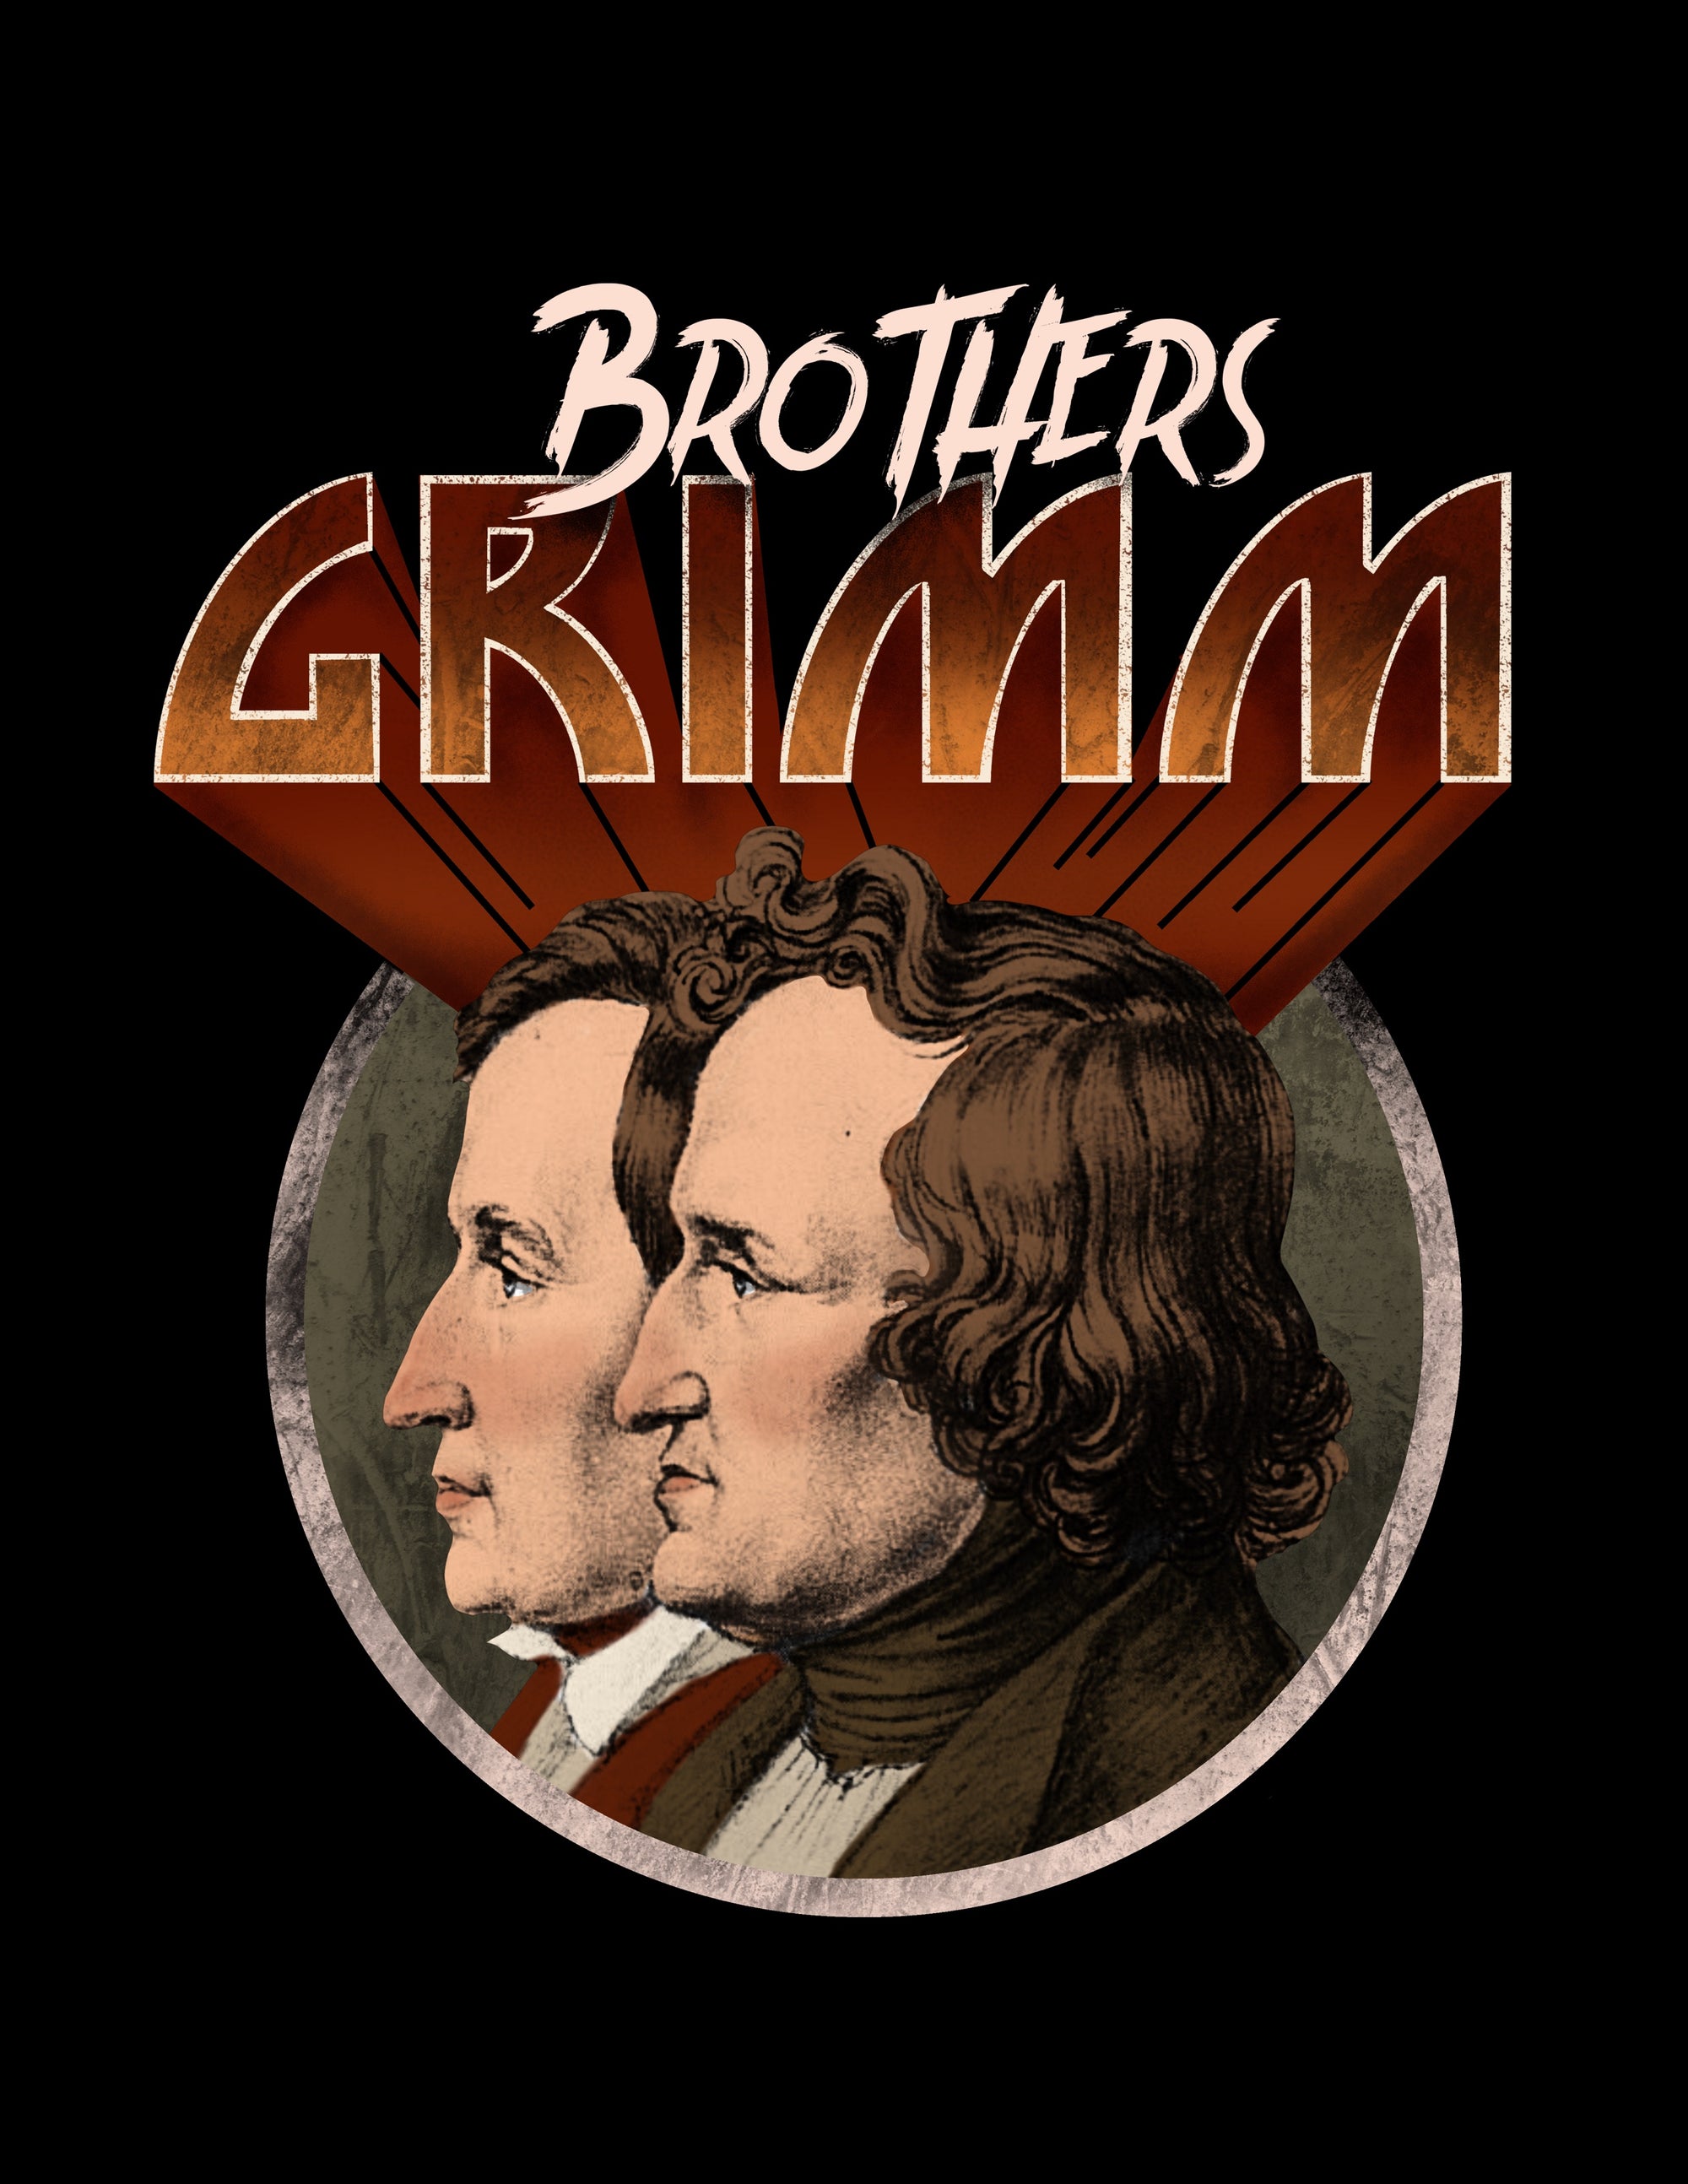 Brothers Grimm Band Tee